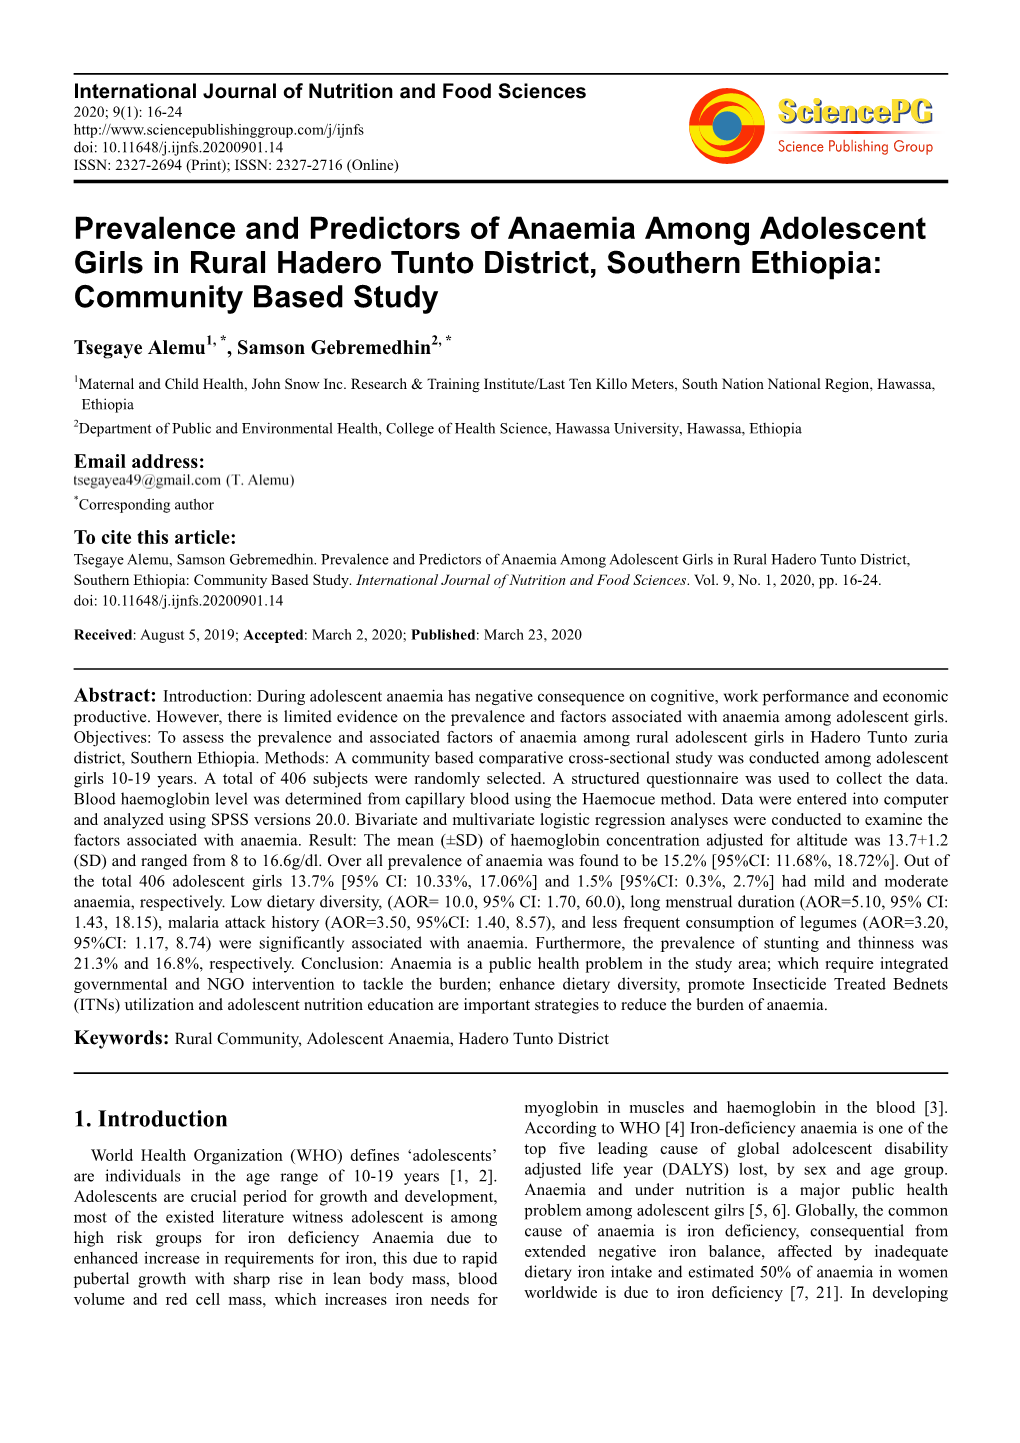 Prevalence and Predictors of Anaemia Among Adolescent Girls in Rural Hadero Tunto District, Southern Ethiopia: Community Based Study